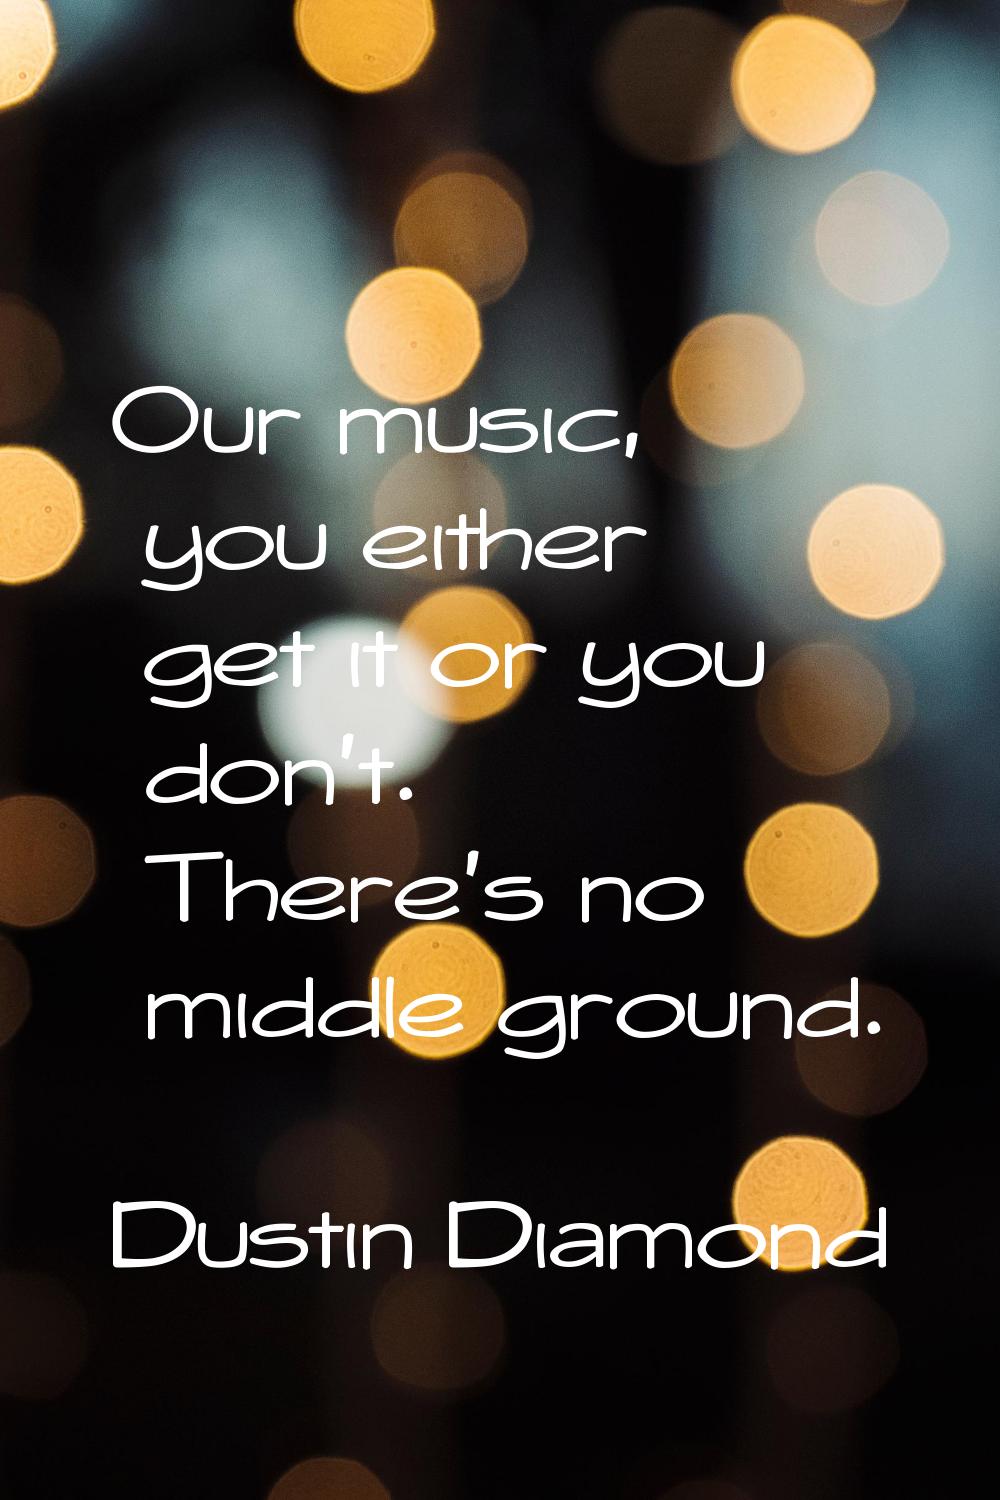 Our music, you either get it or you don't. There's no middle ground.